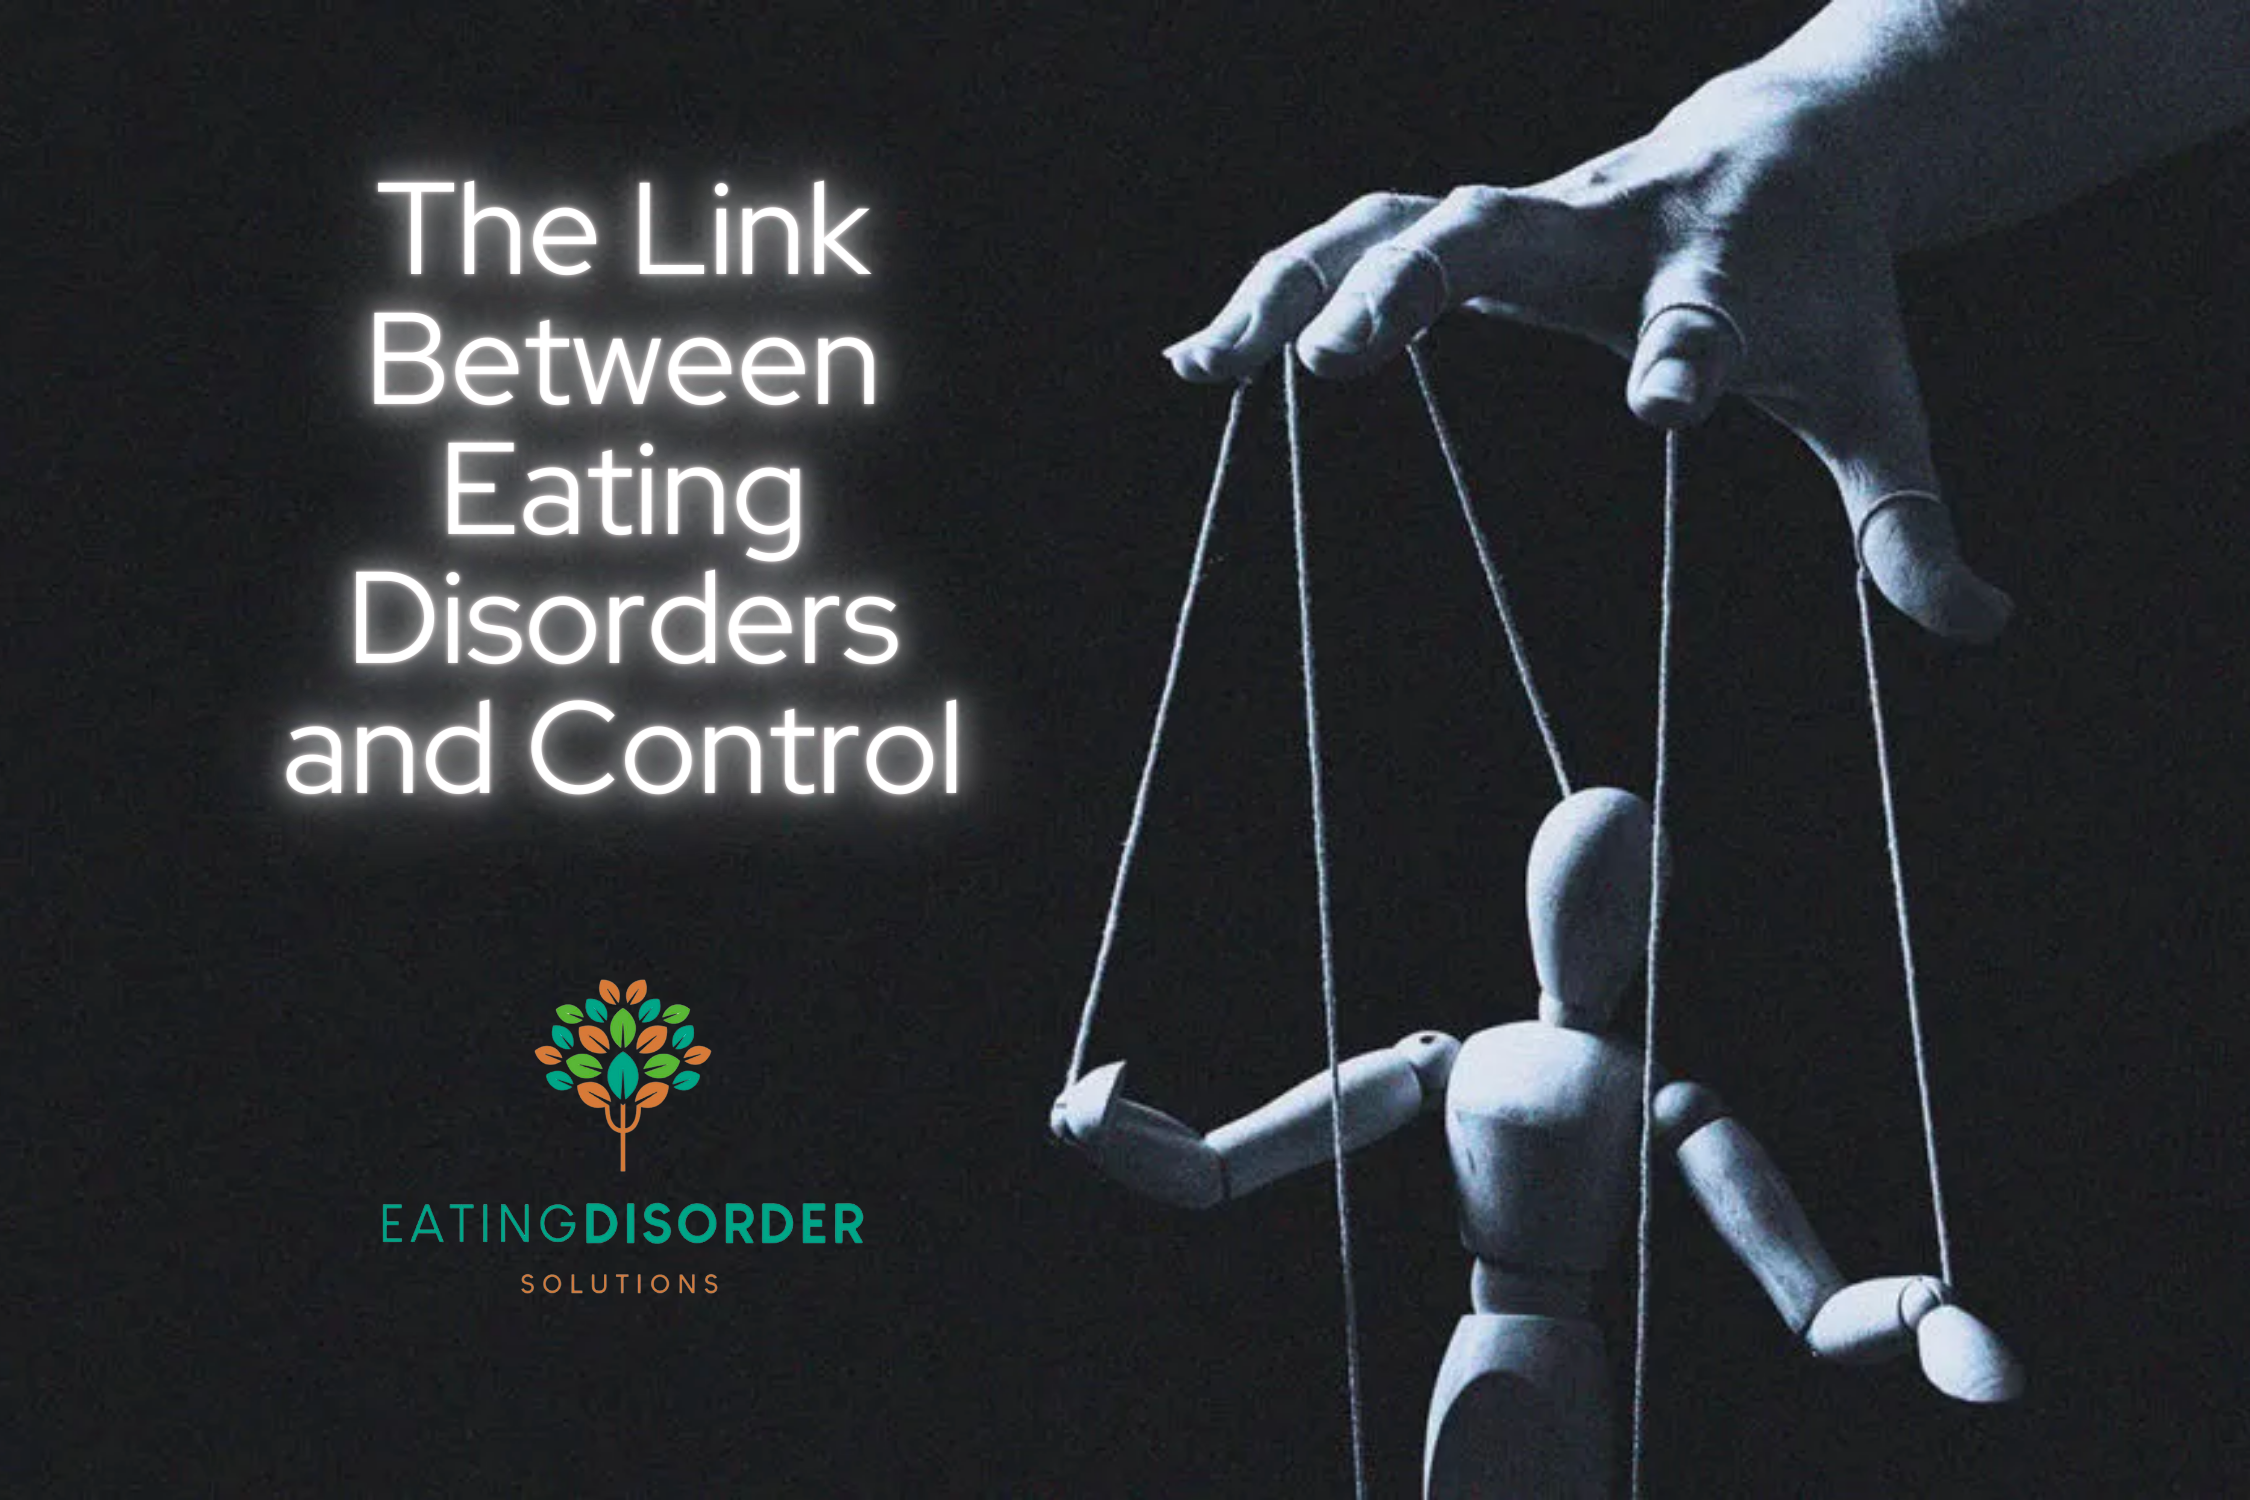 Eating disorders and control